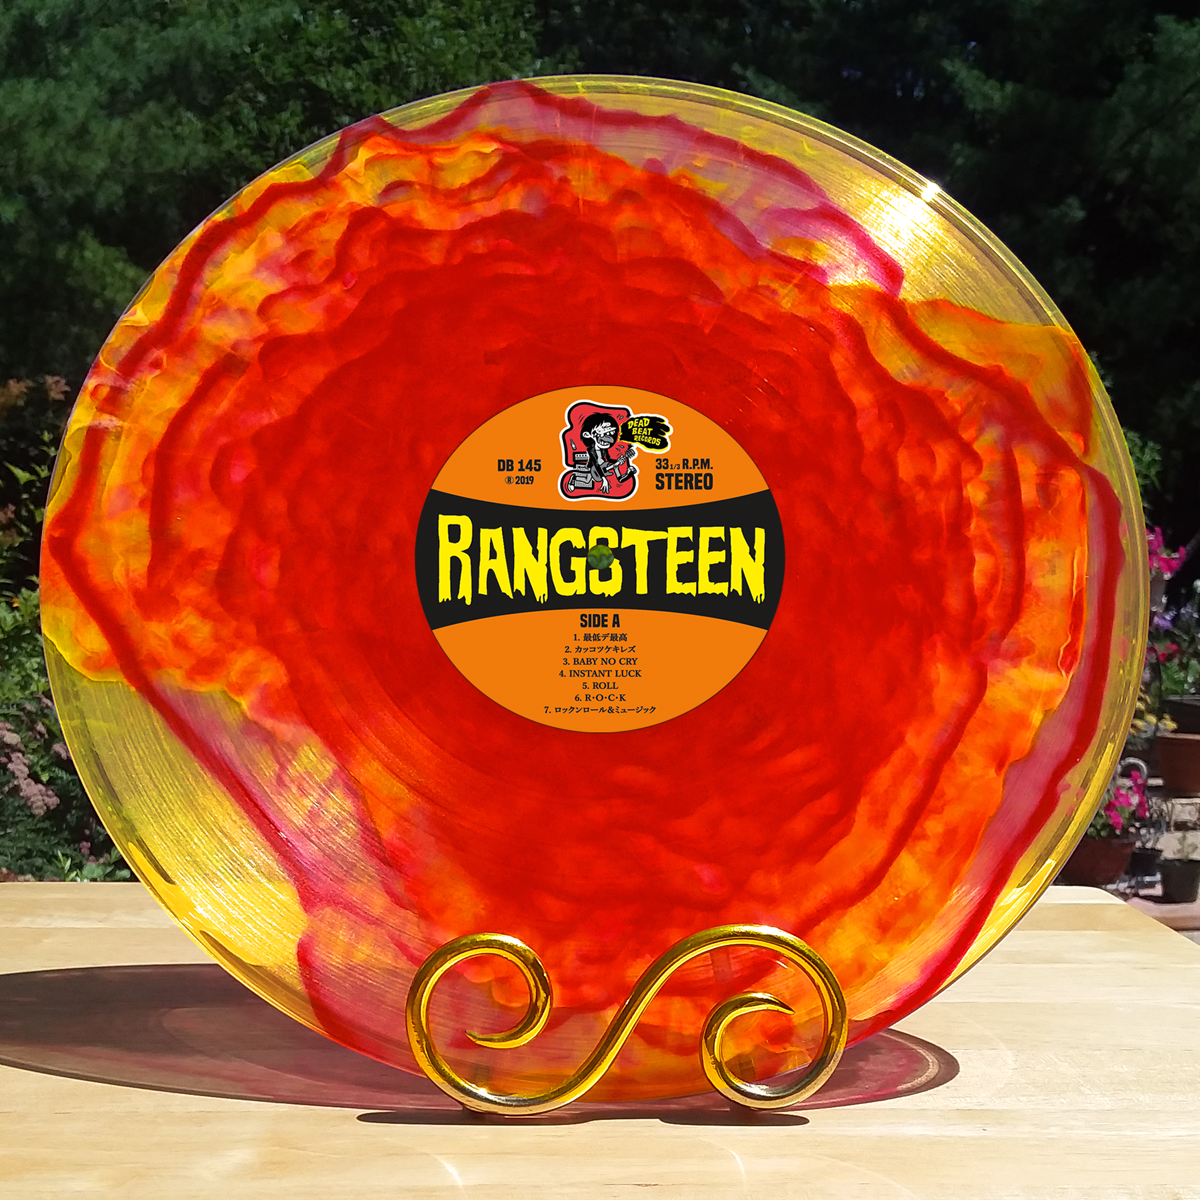 Rangsteen- S/T LP ~RAREST VOLCANIC LAVA BURST (WAX MAGE) EDITION LIMITED TO 25 COPIES!